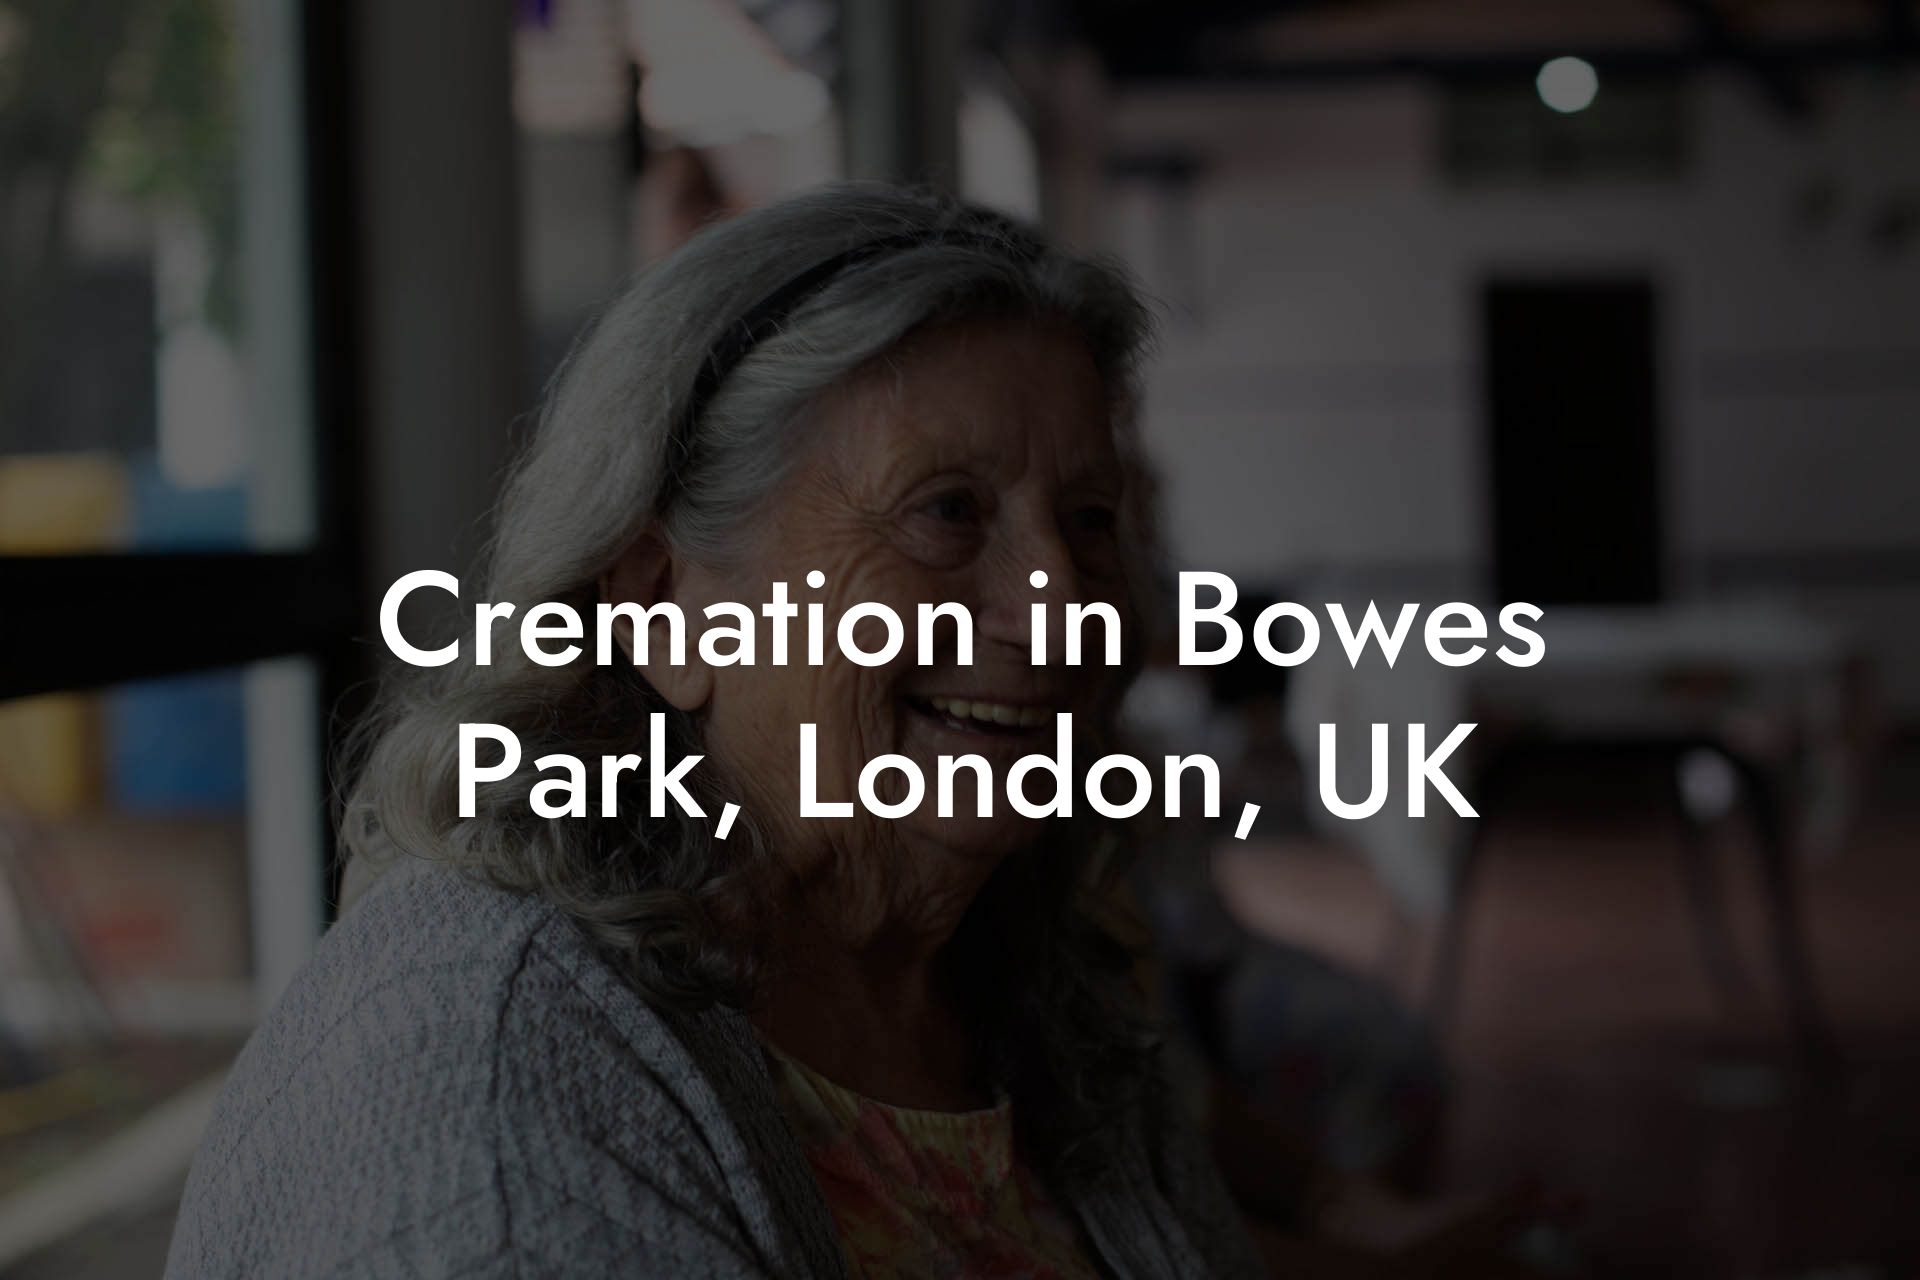 Cremation in Bowes Park, London, UK